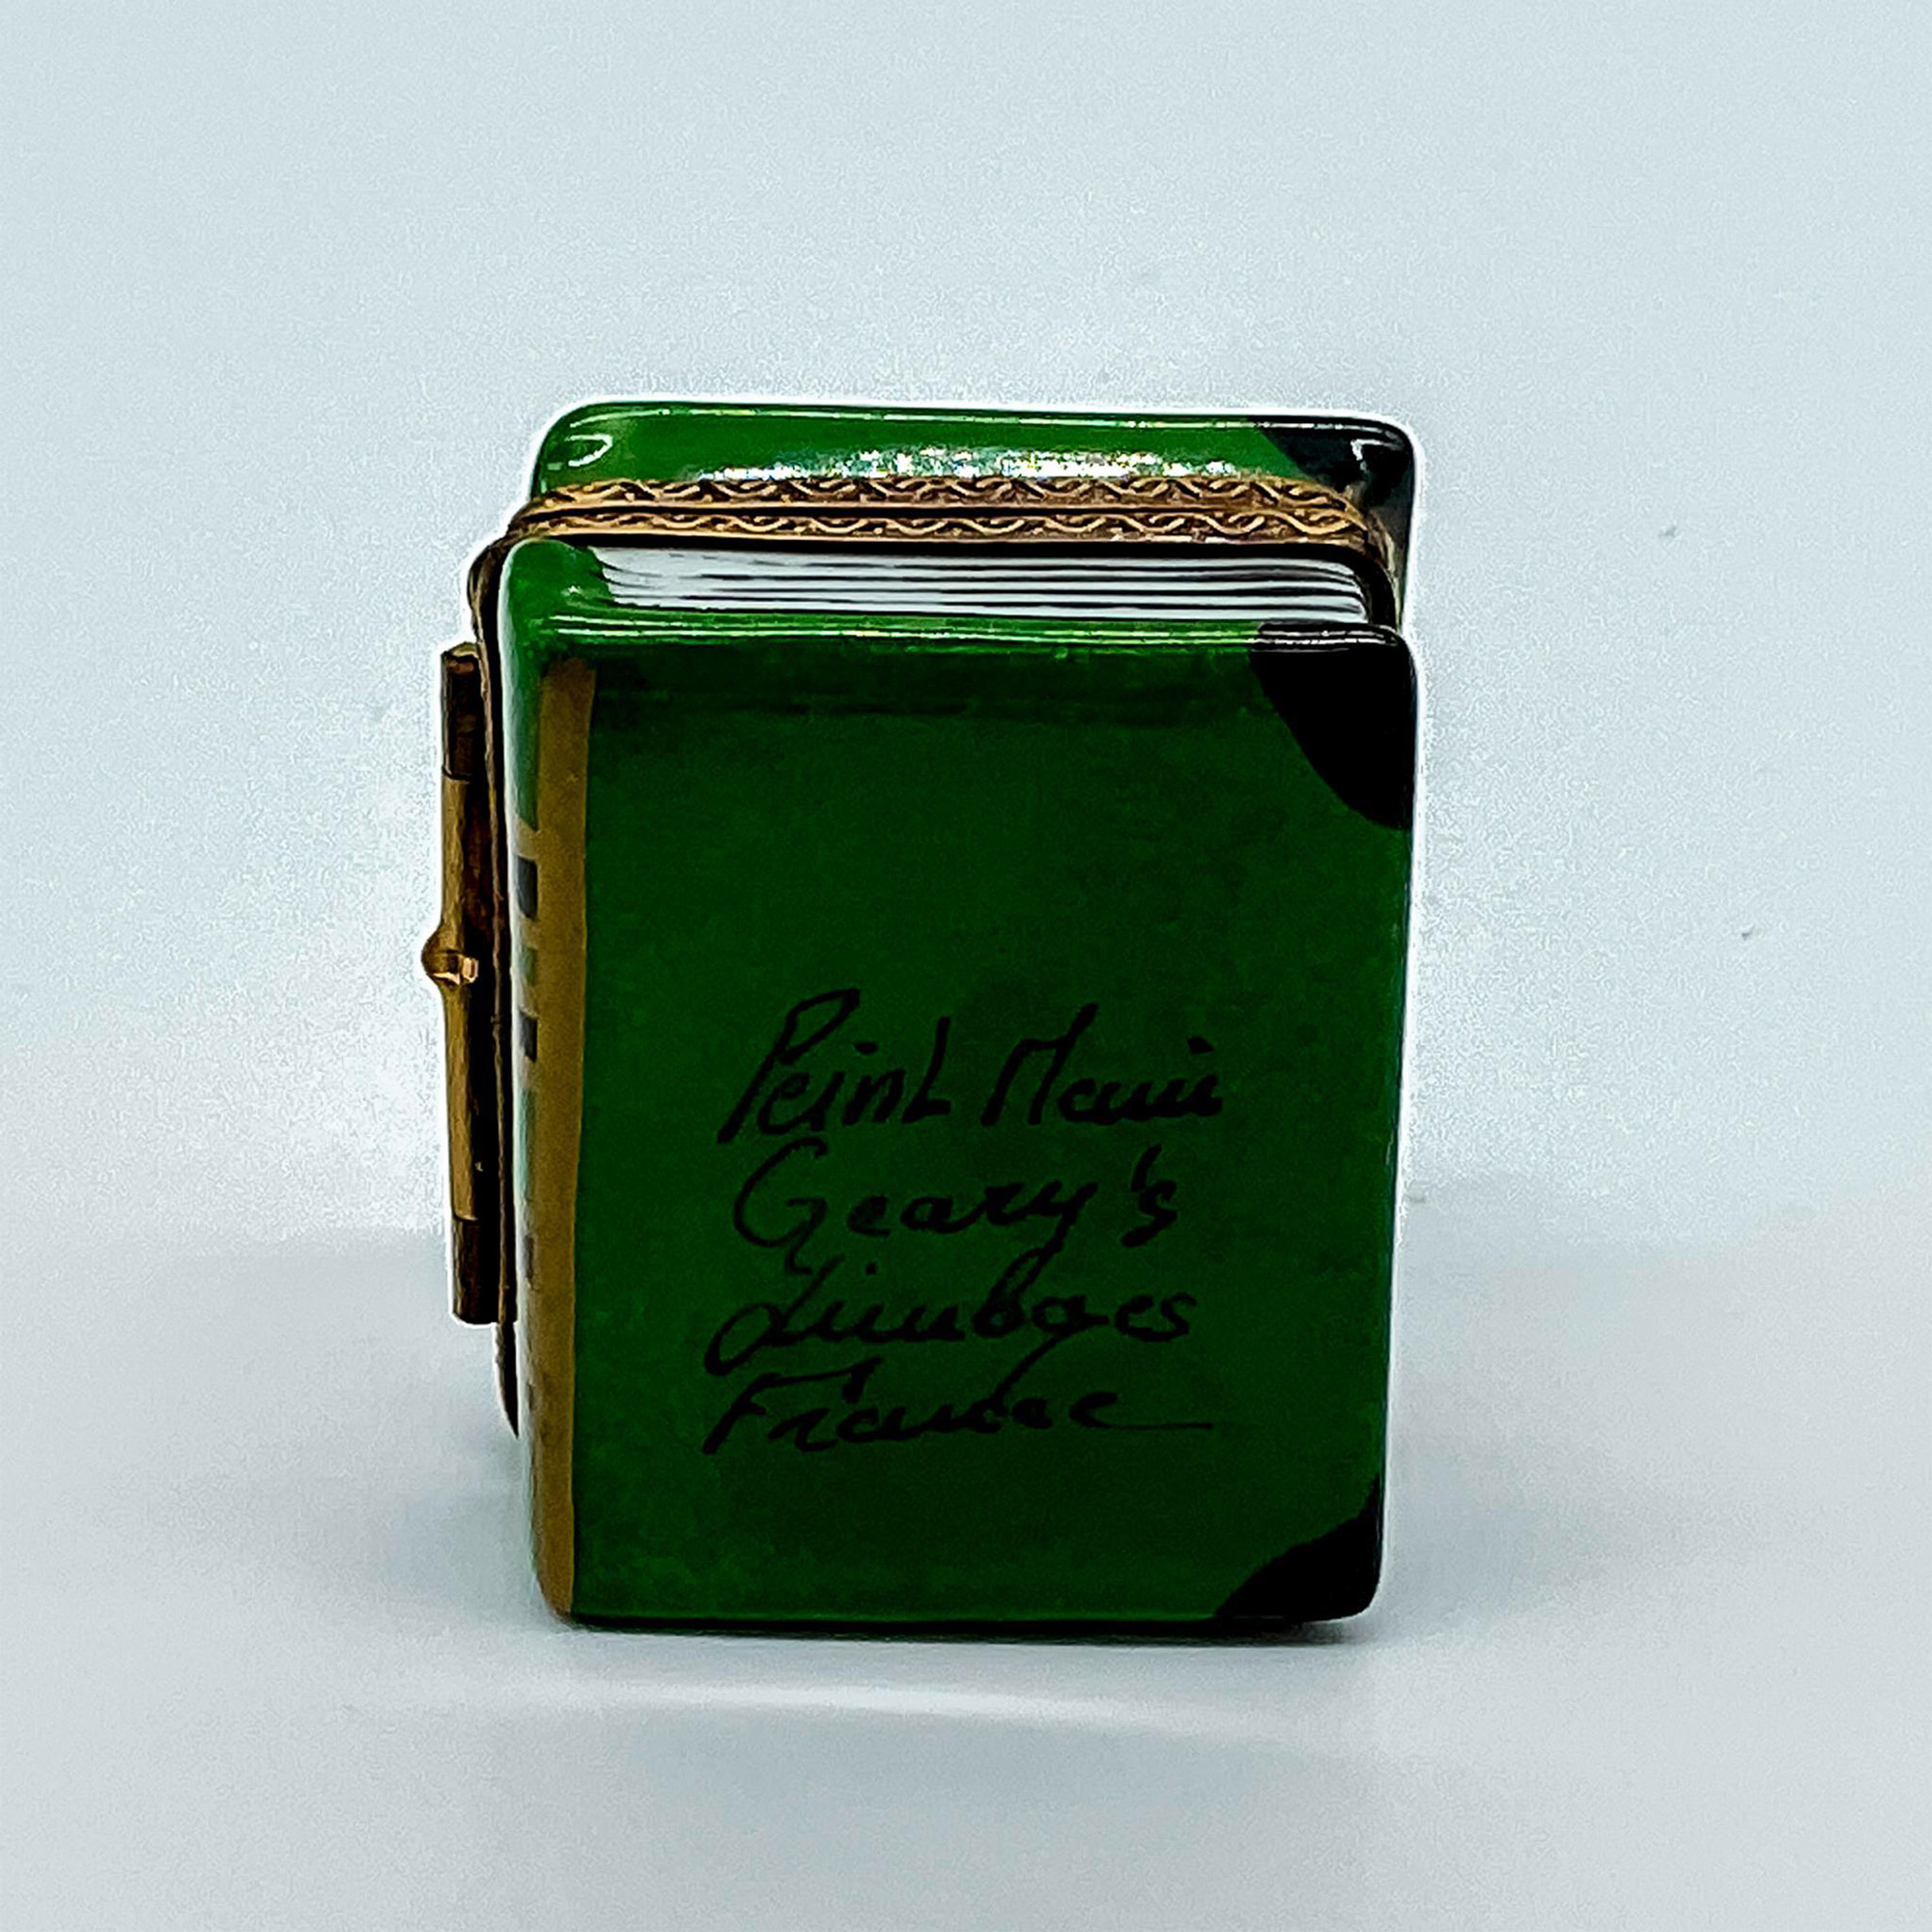 Limoges Geary Porcelain Leather-Bound Book Box - Image 3 of 3